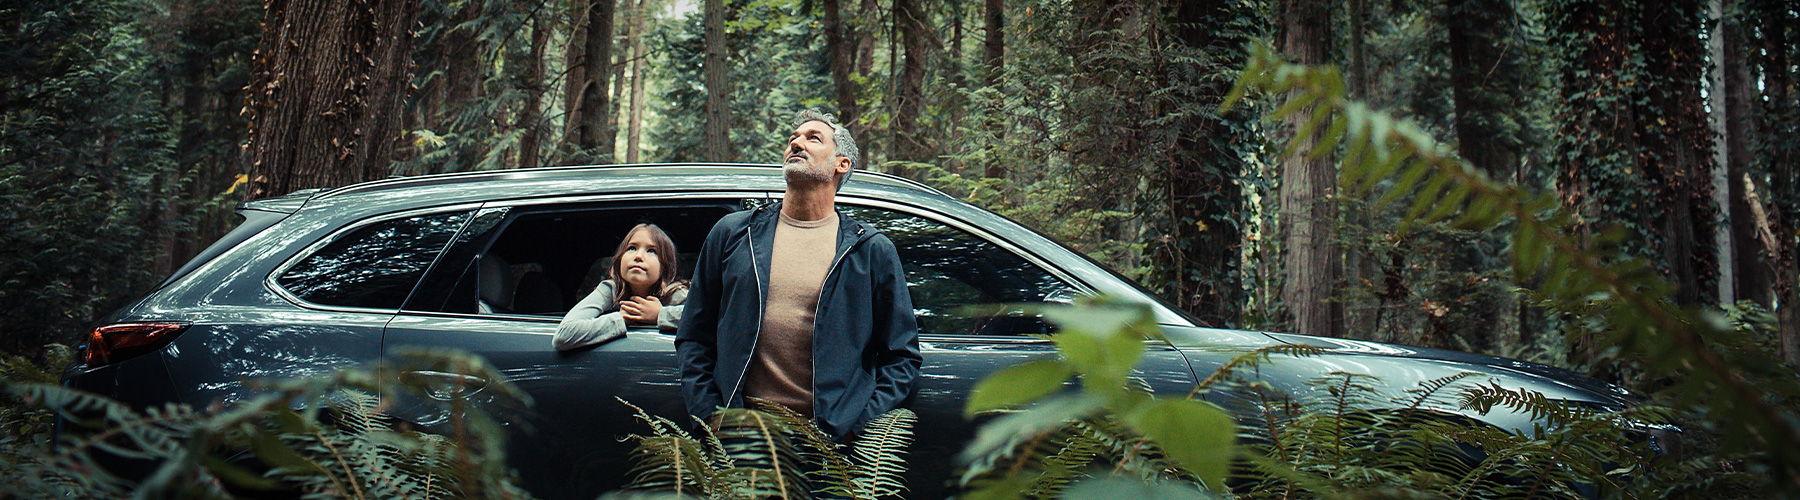 A dad and his daughter enjoying the forest with their Mazda CX-9